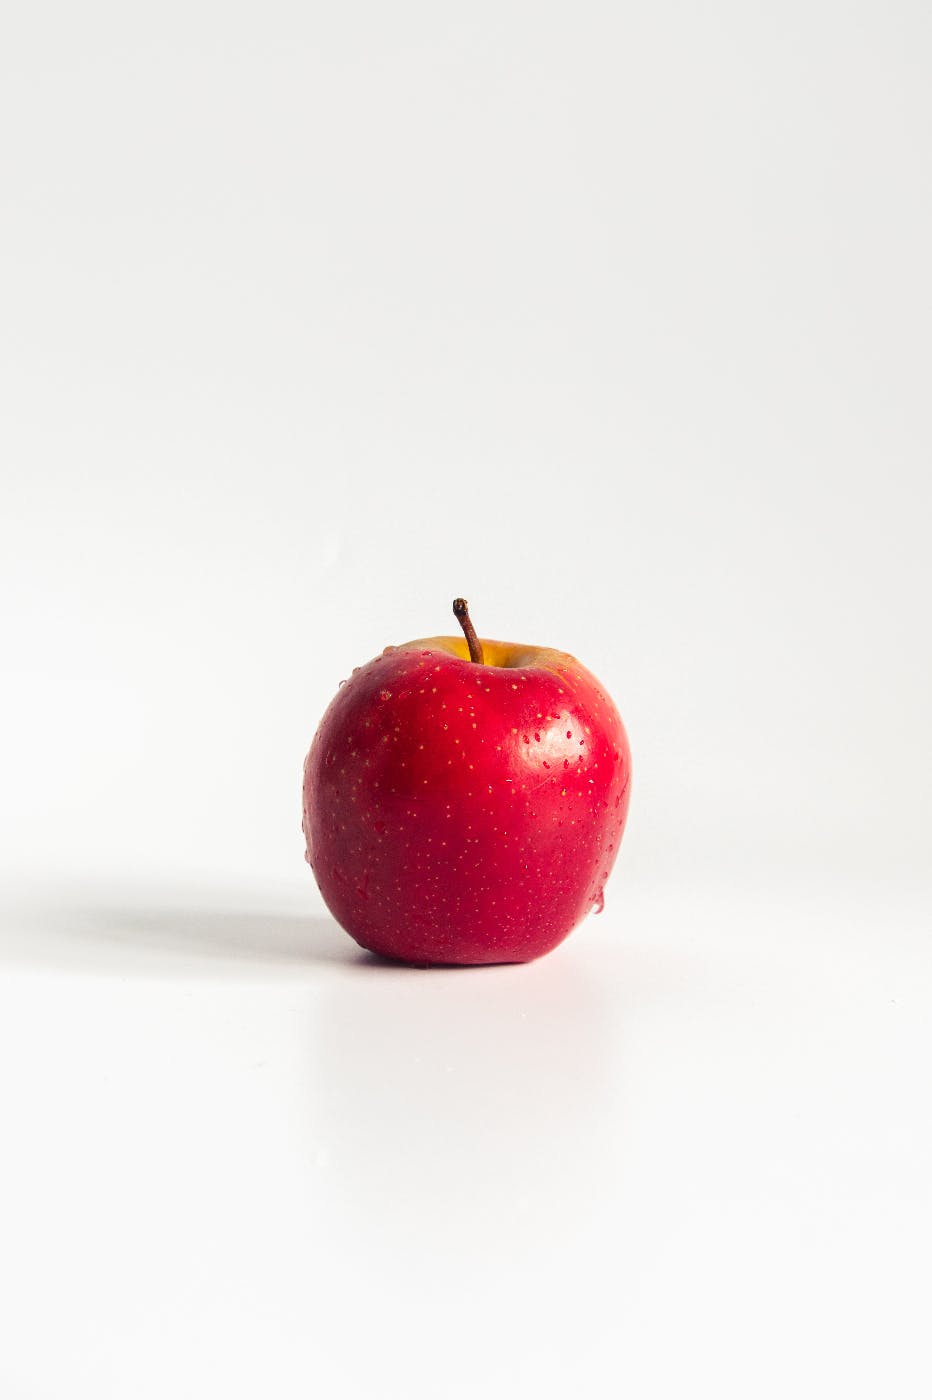 A dew covered apple against a white background